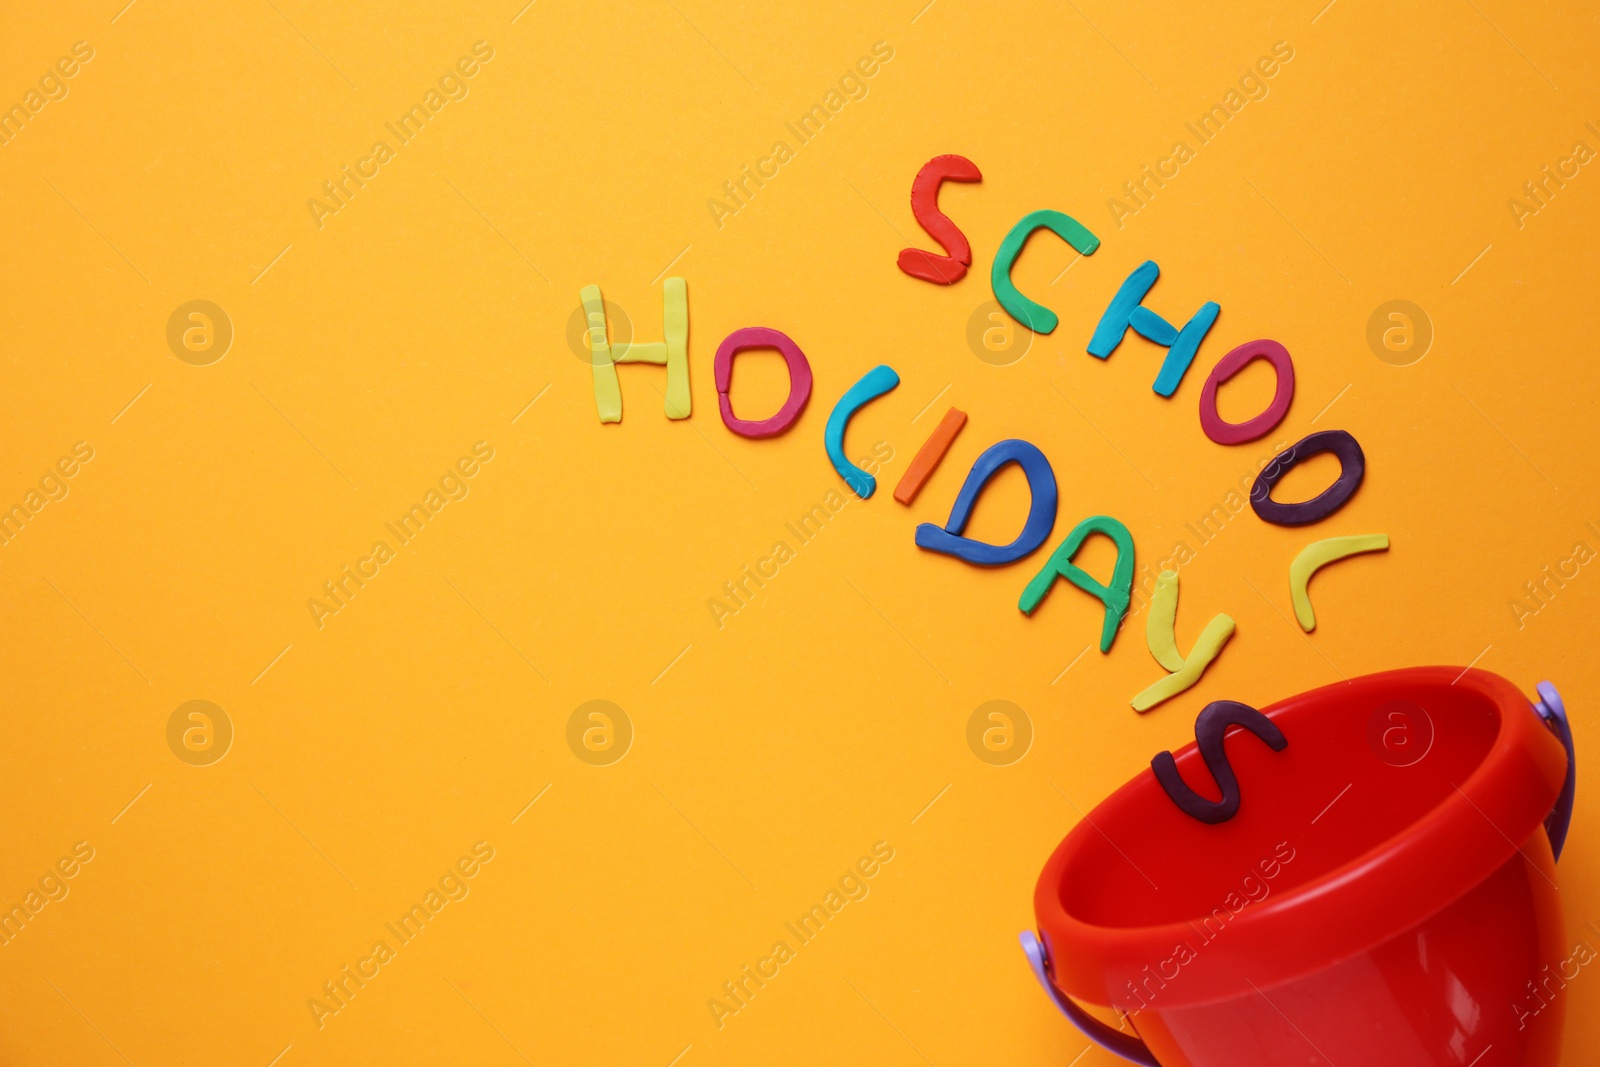 Photo of Phrase School Holidays made of modeling clay and plastic bucket on orange background, top view